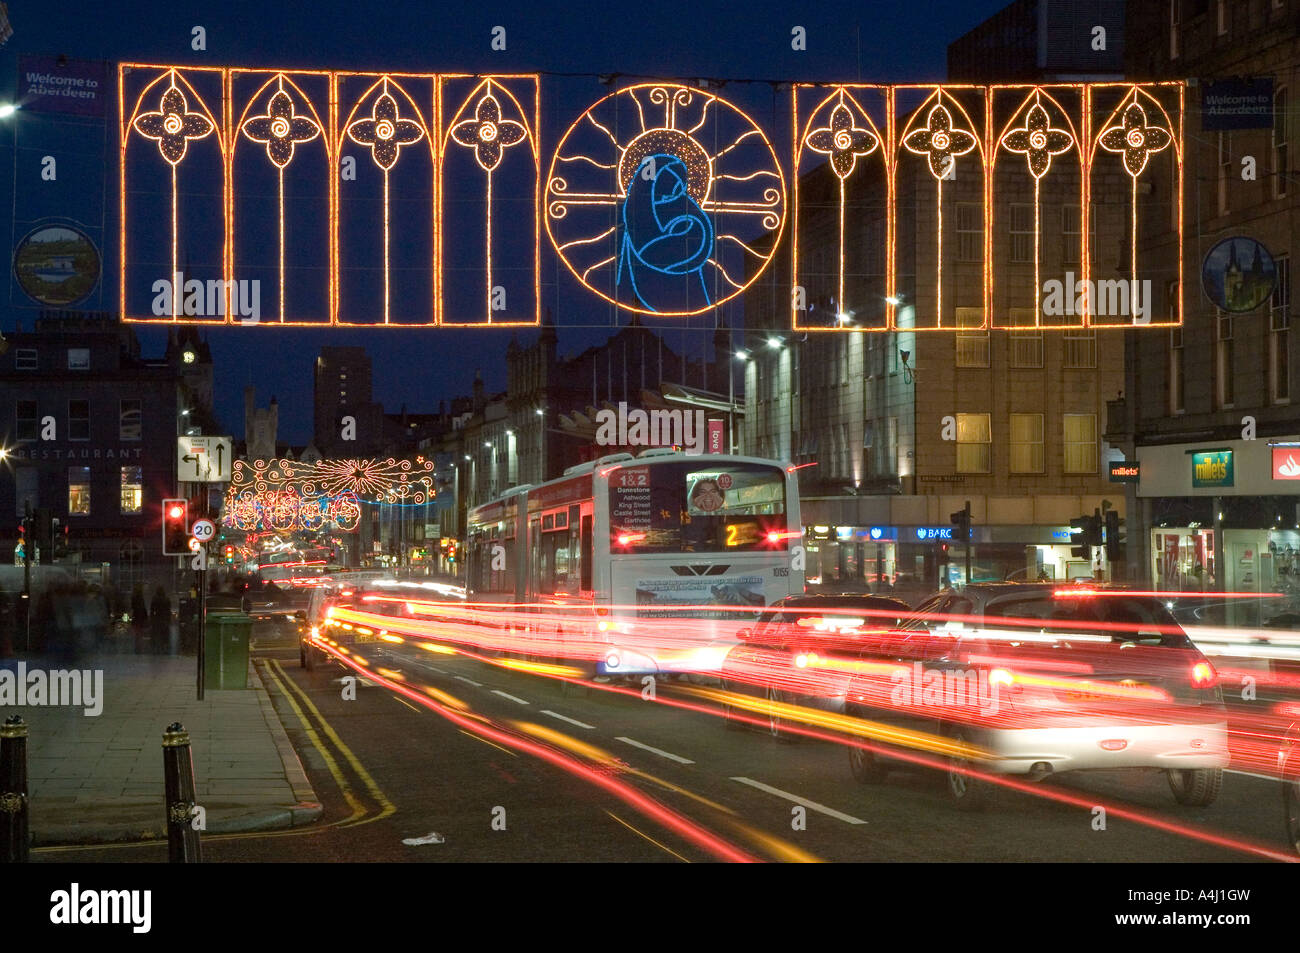 City centre roads, traffic trails, businesses and Christmas lights decorations in Aberdeen, Scotland, UK Stock Photo